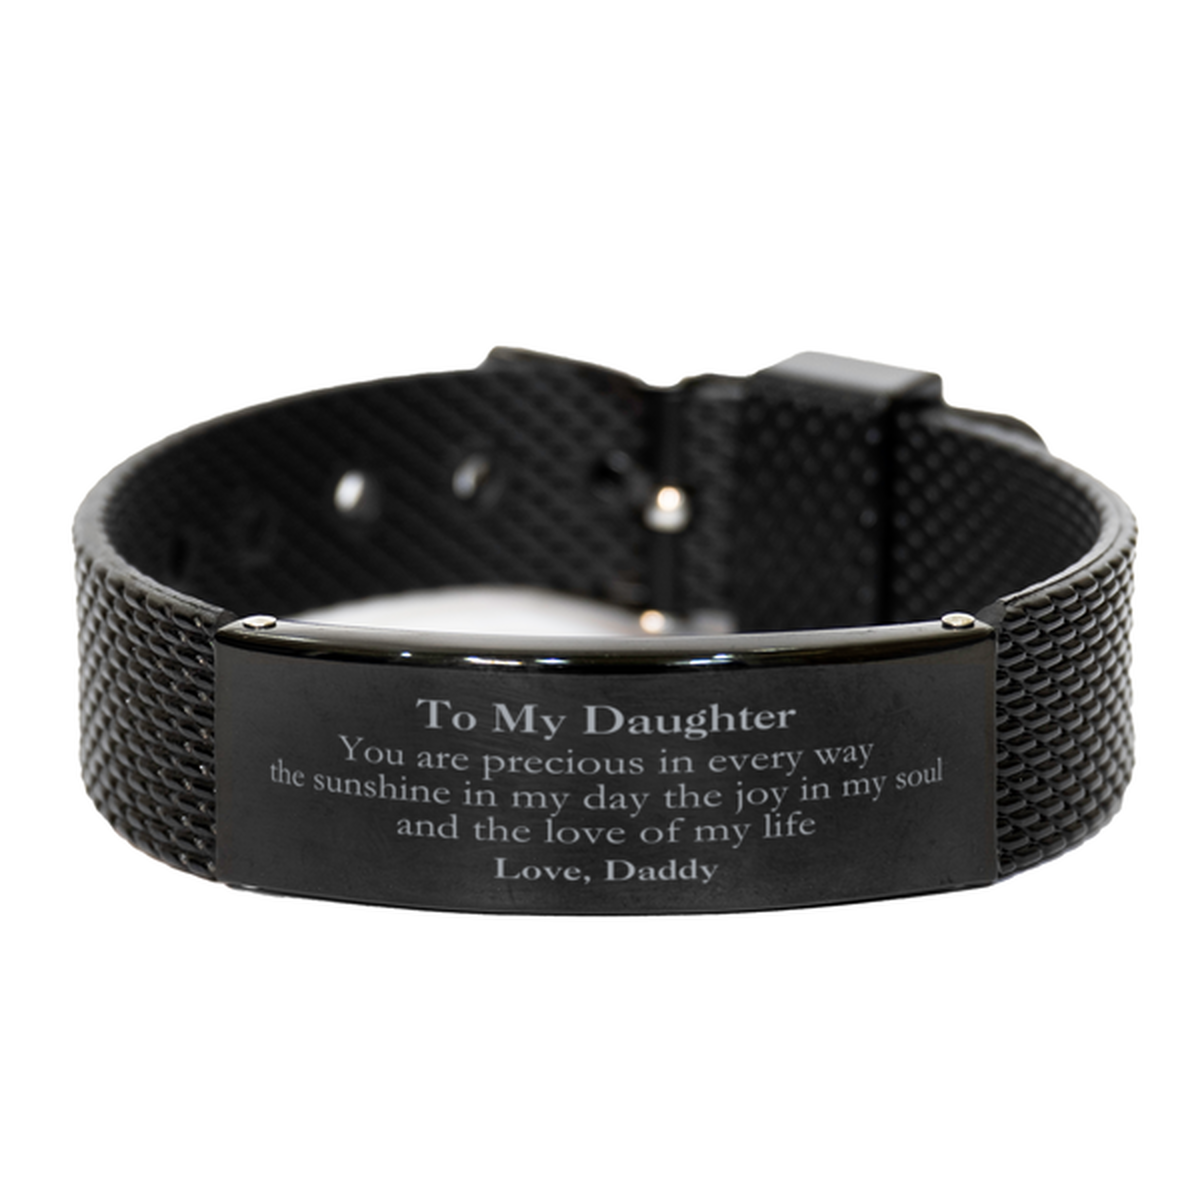 Graduation Gifts for Daughter Black Shark Mesh Bracelet Present from Daddy, Christmas Daughter Birthday Gifts Daughter You are precious in every way the sunshine in my day. Love, Daddy